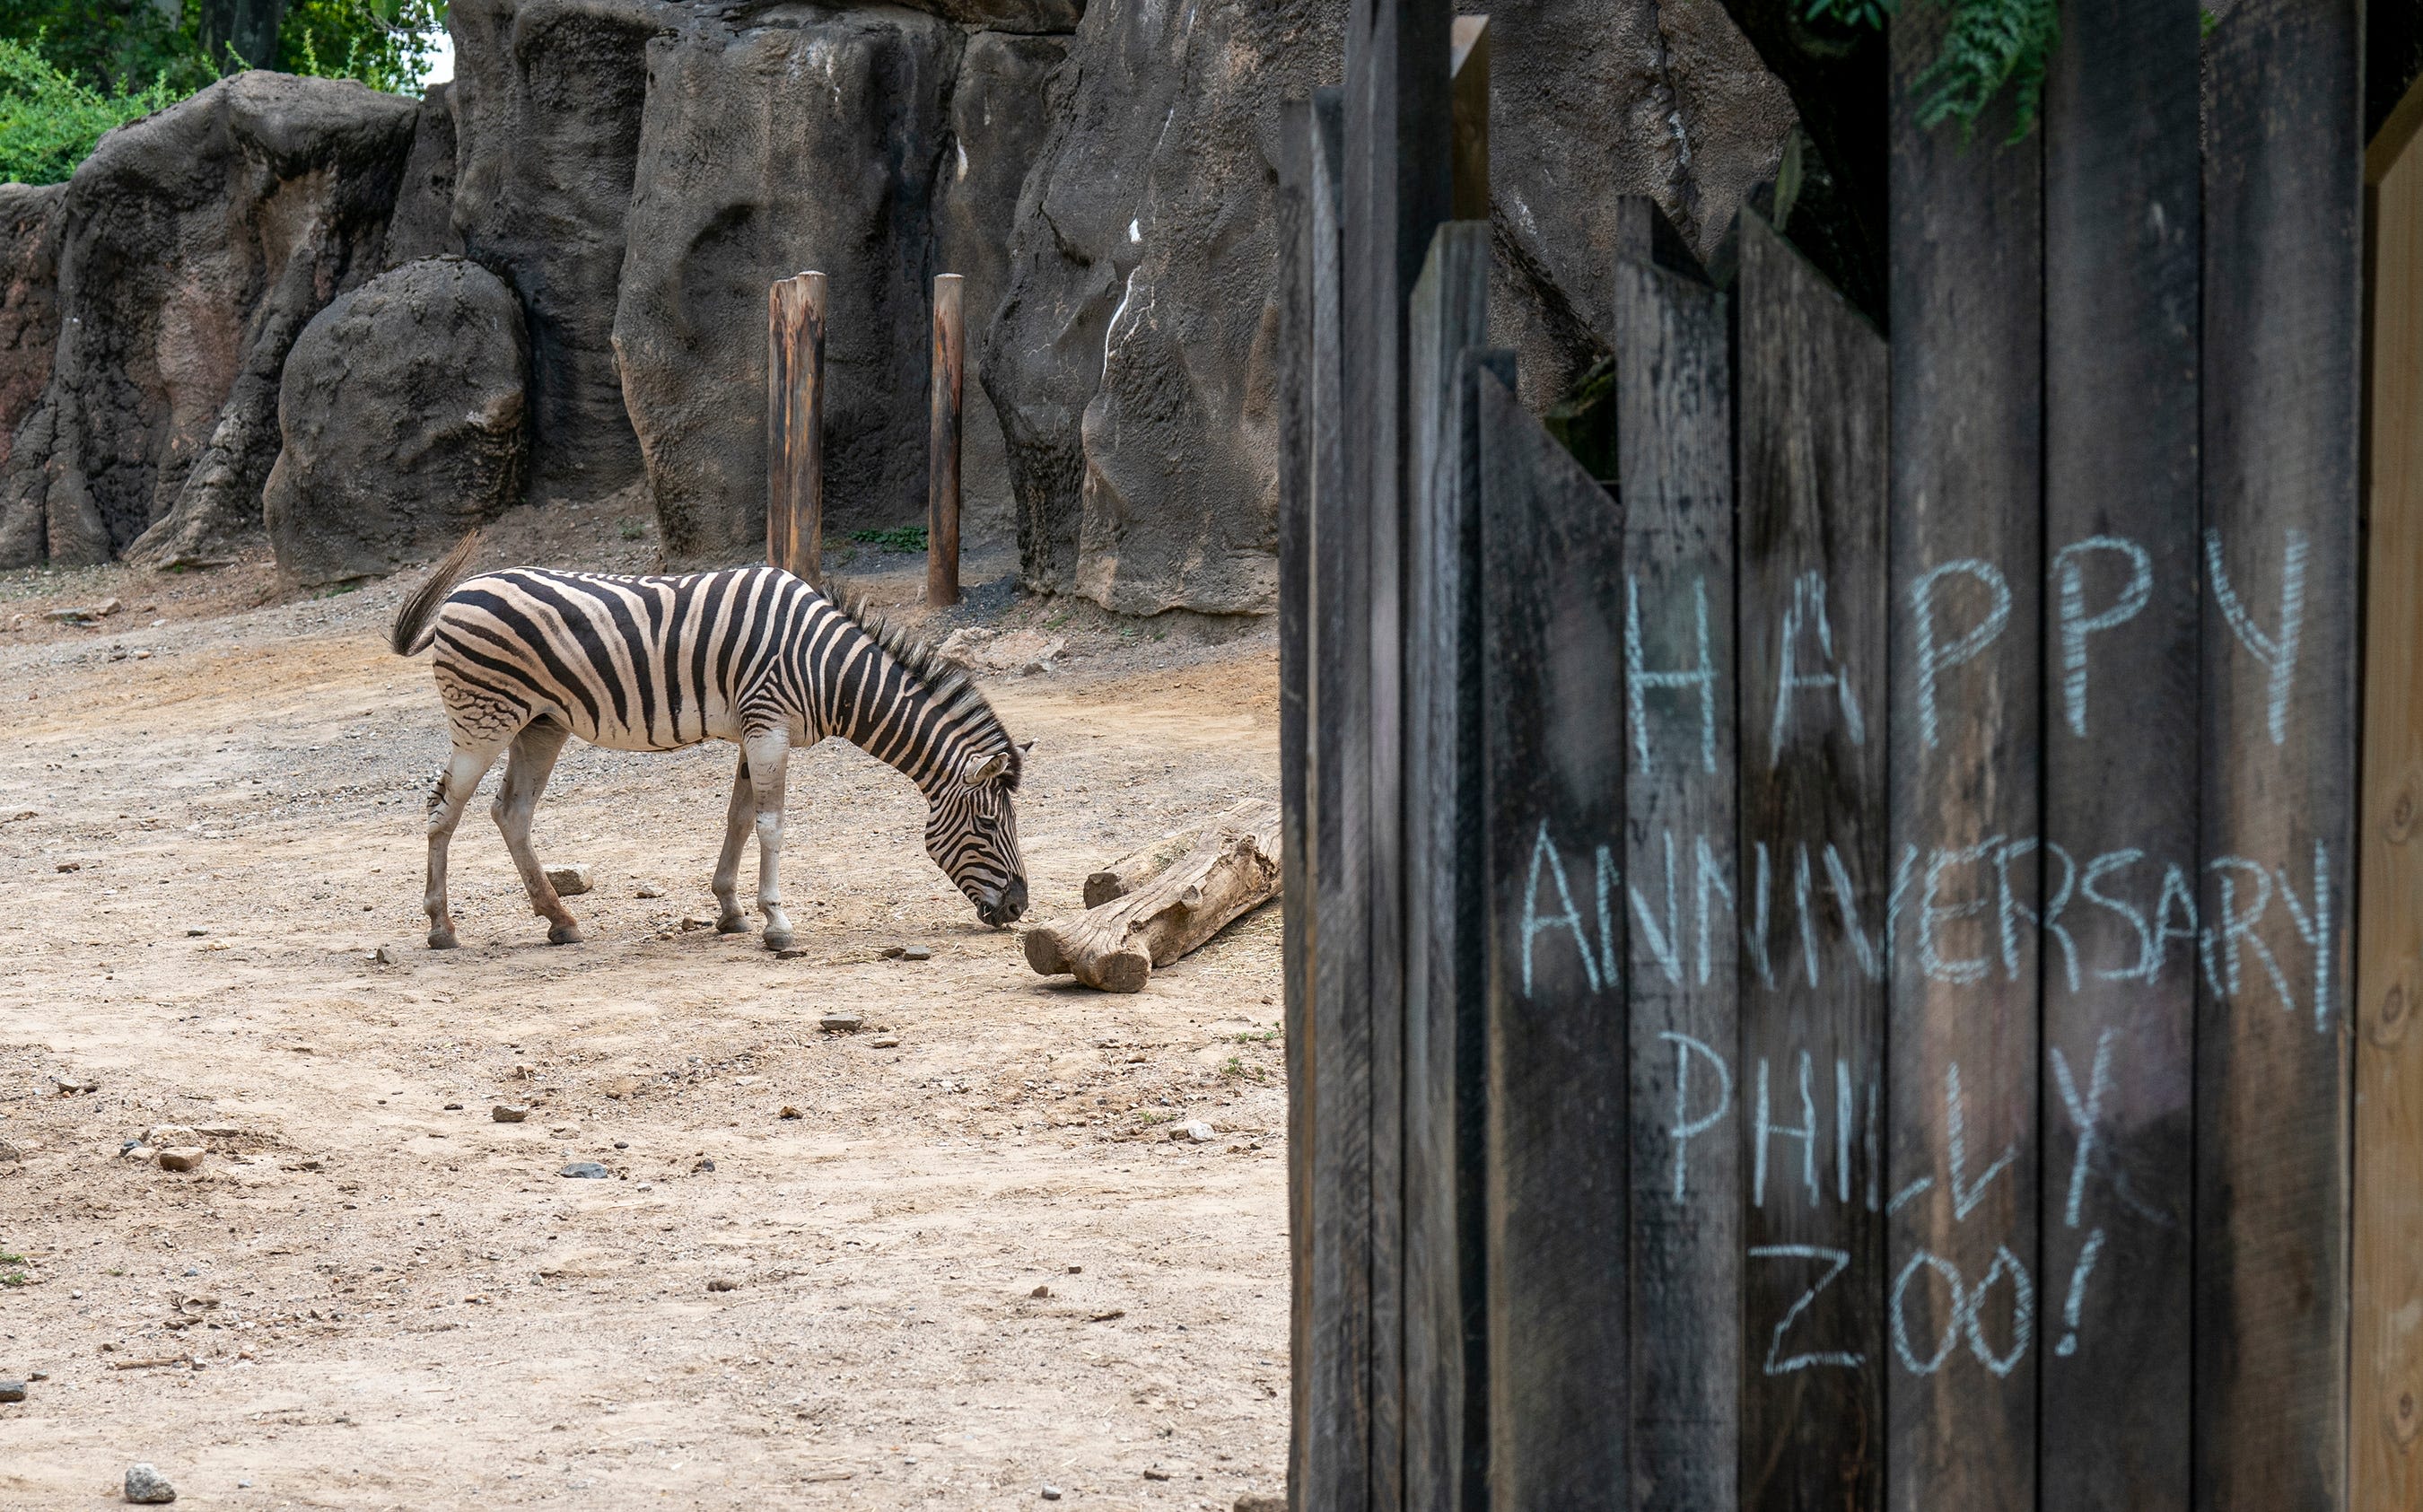 Oldest zoo in the US finds new ways to flourish. See how it is making its mark.